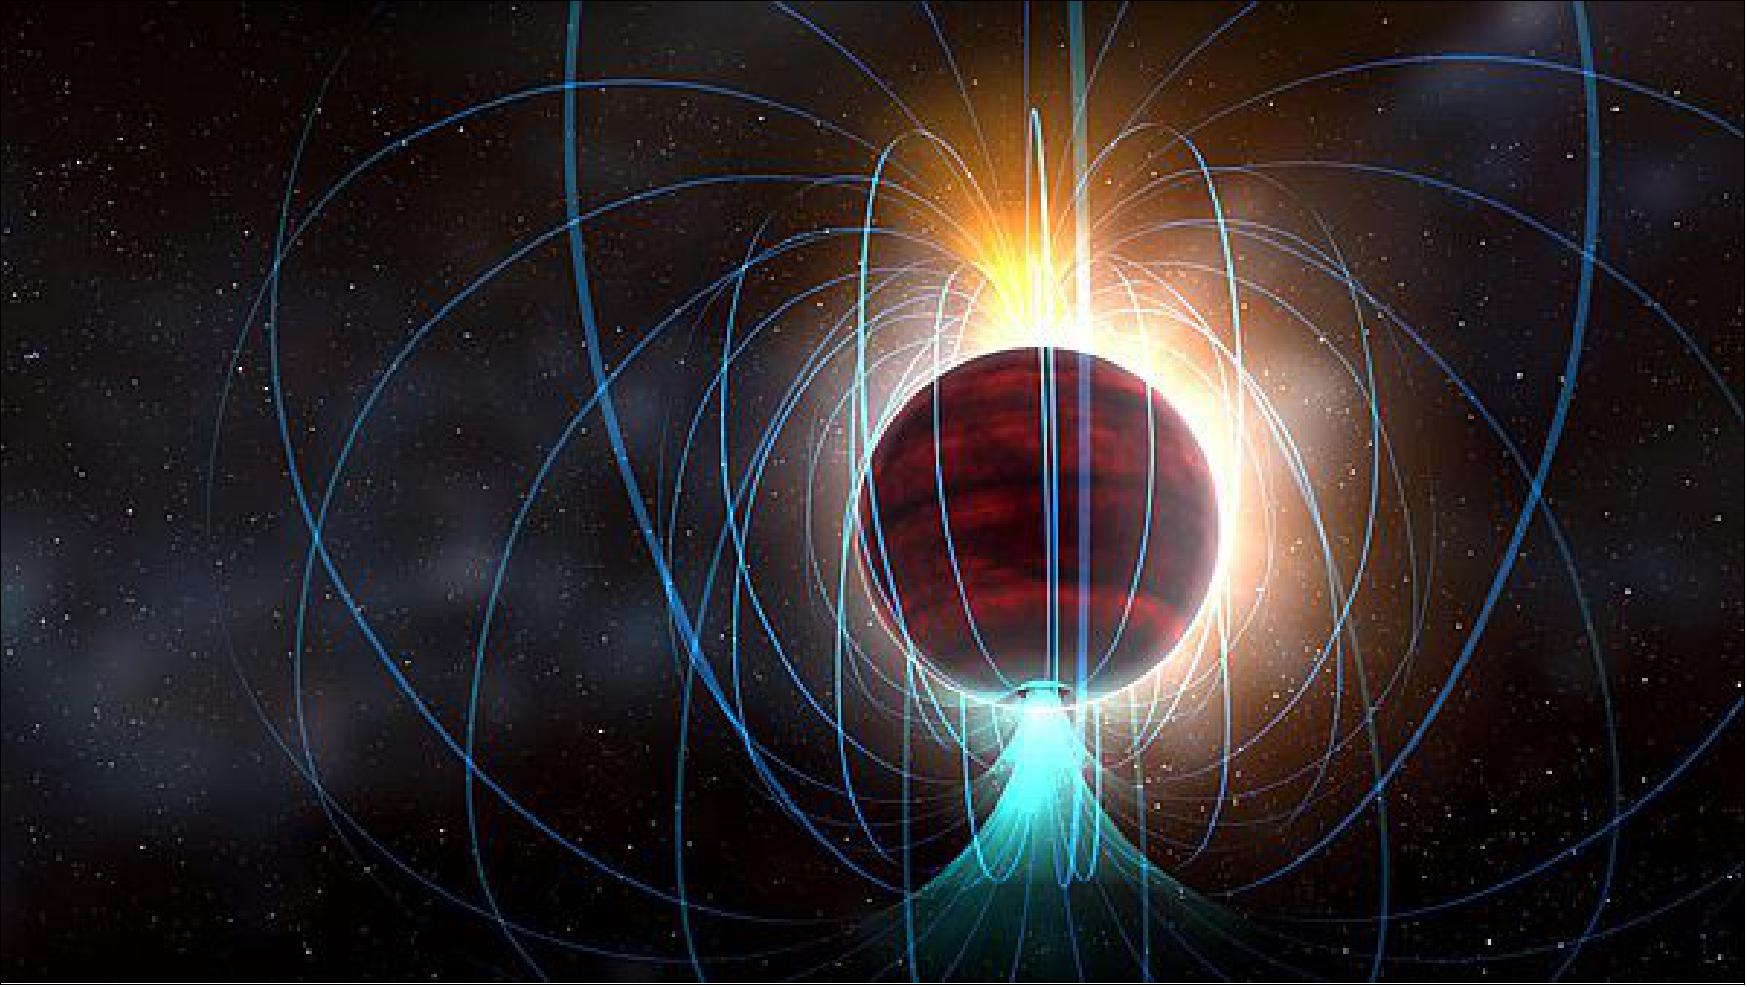 Figure 57: Artist's impression of red dwarf star TVLM 513-46546. ALMA observations suggest that it has an amazingly powerful magnetic field, potentially associated with a flurry of solar-flare-like eruptions (image credit: Dana Berry (NRAO/AUI/NSF) / SkyWorks)